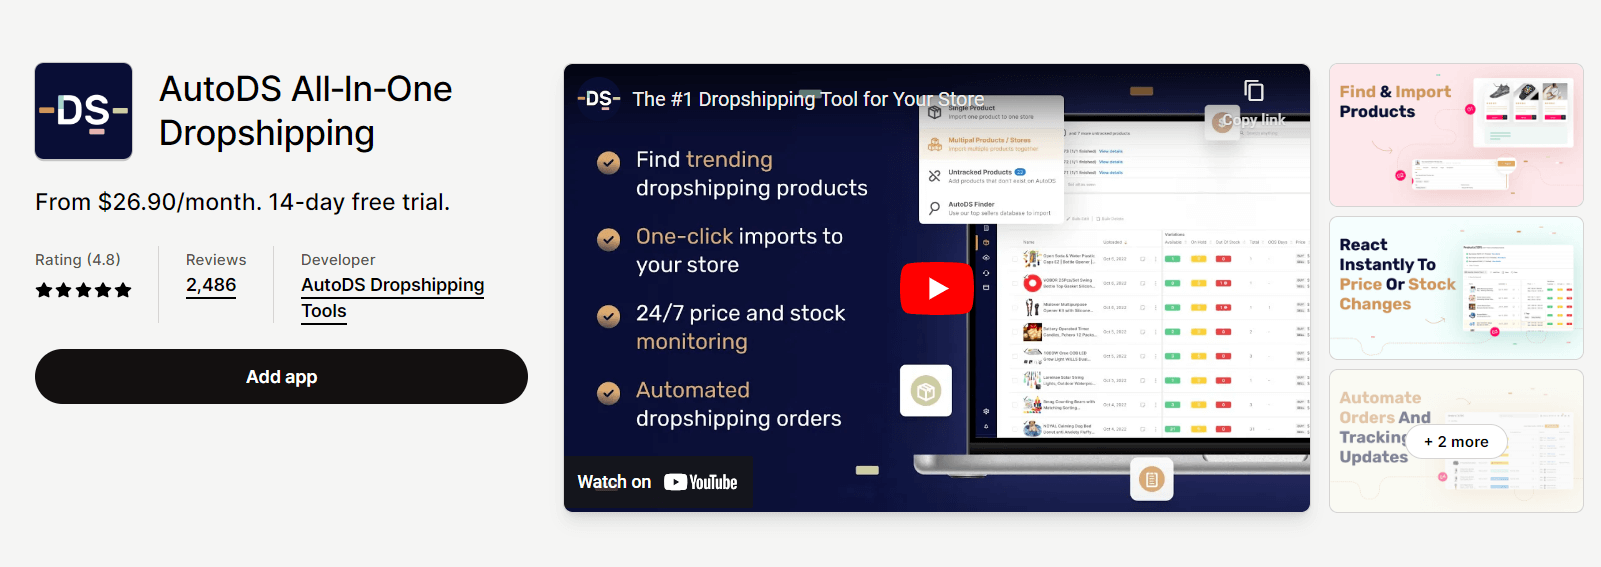 Shopify dropshipping apps - AutoDS